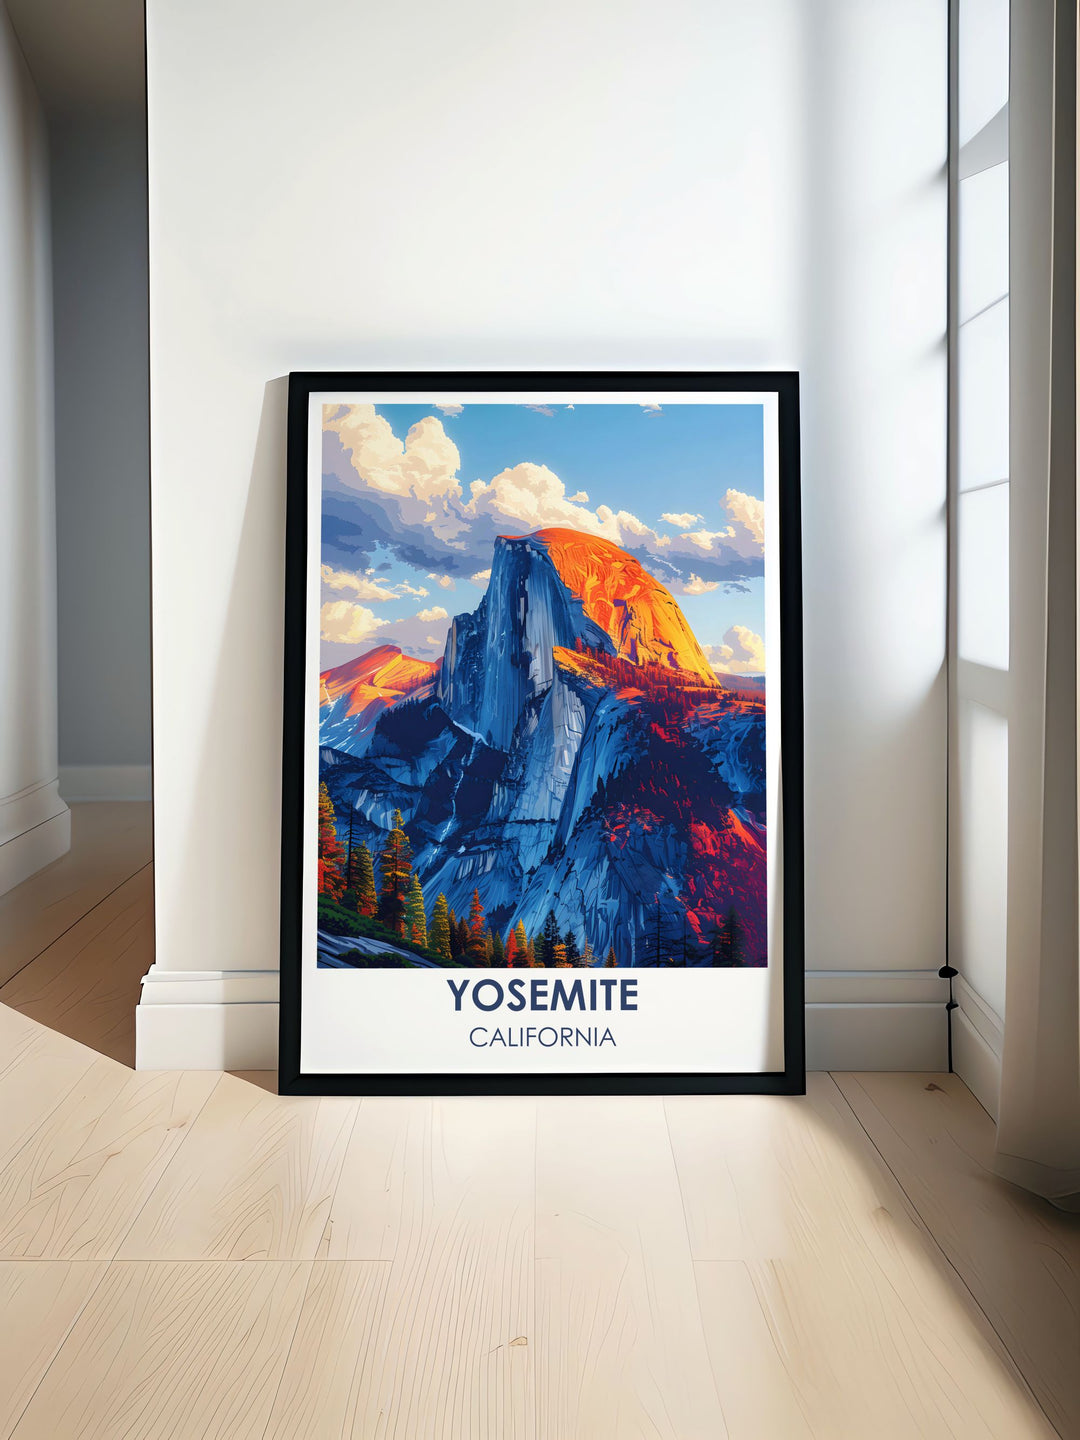 Featuring the iconic Half Dome in Yosemite, this poster highlights the stunning granite formation against a backdrop of clear blue skies, making it an ideal piece for nature lovers and adventurers alike.